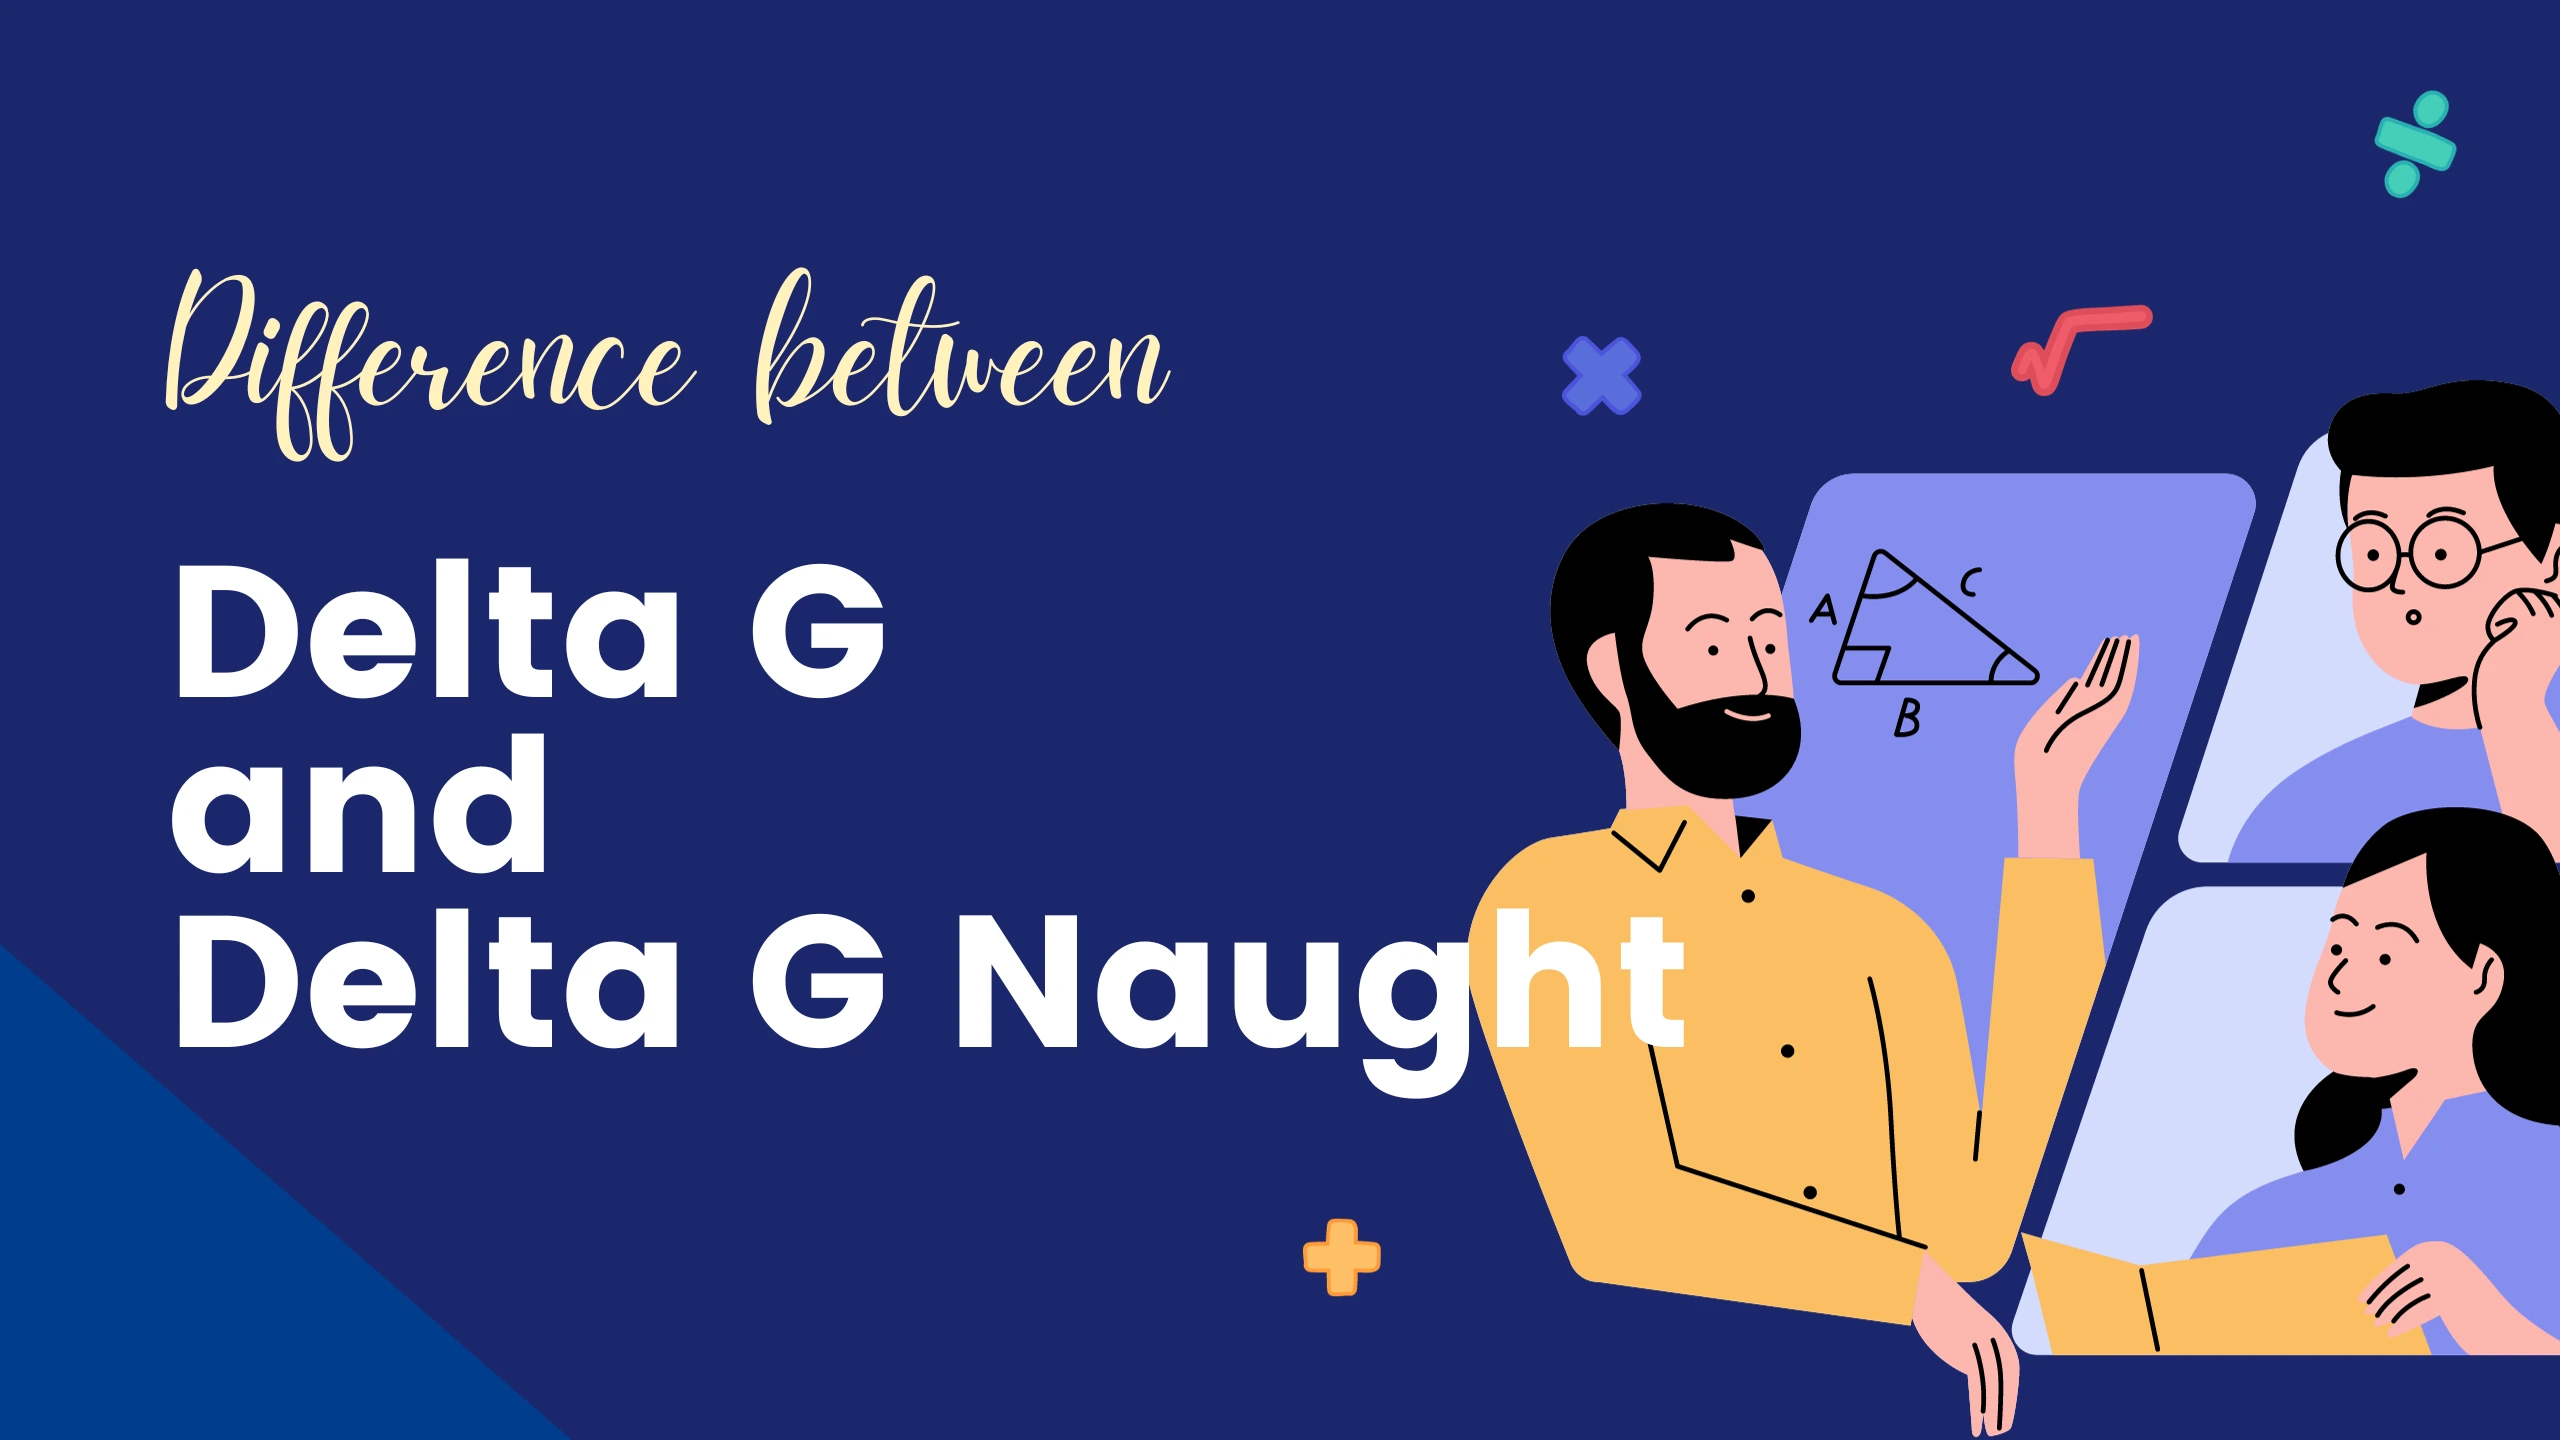 Difference Between Delta G and Delta G Naught